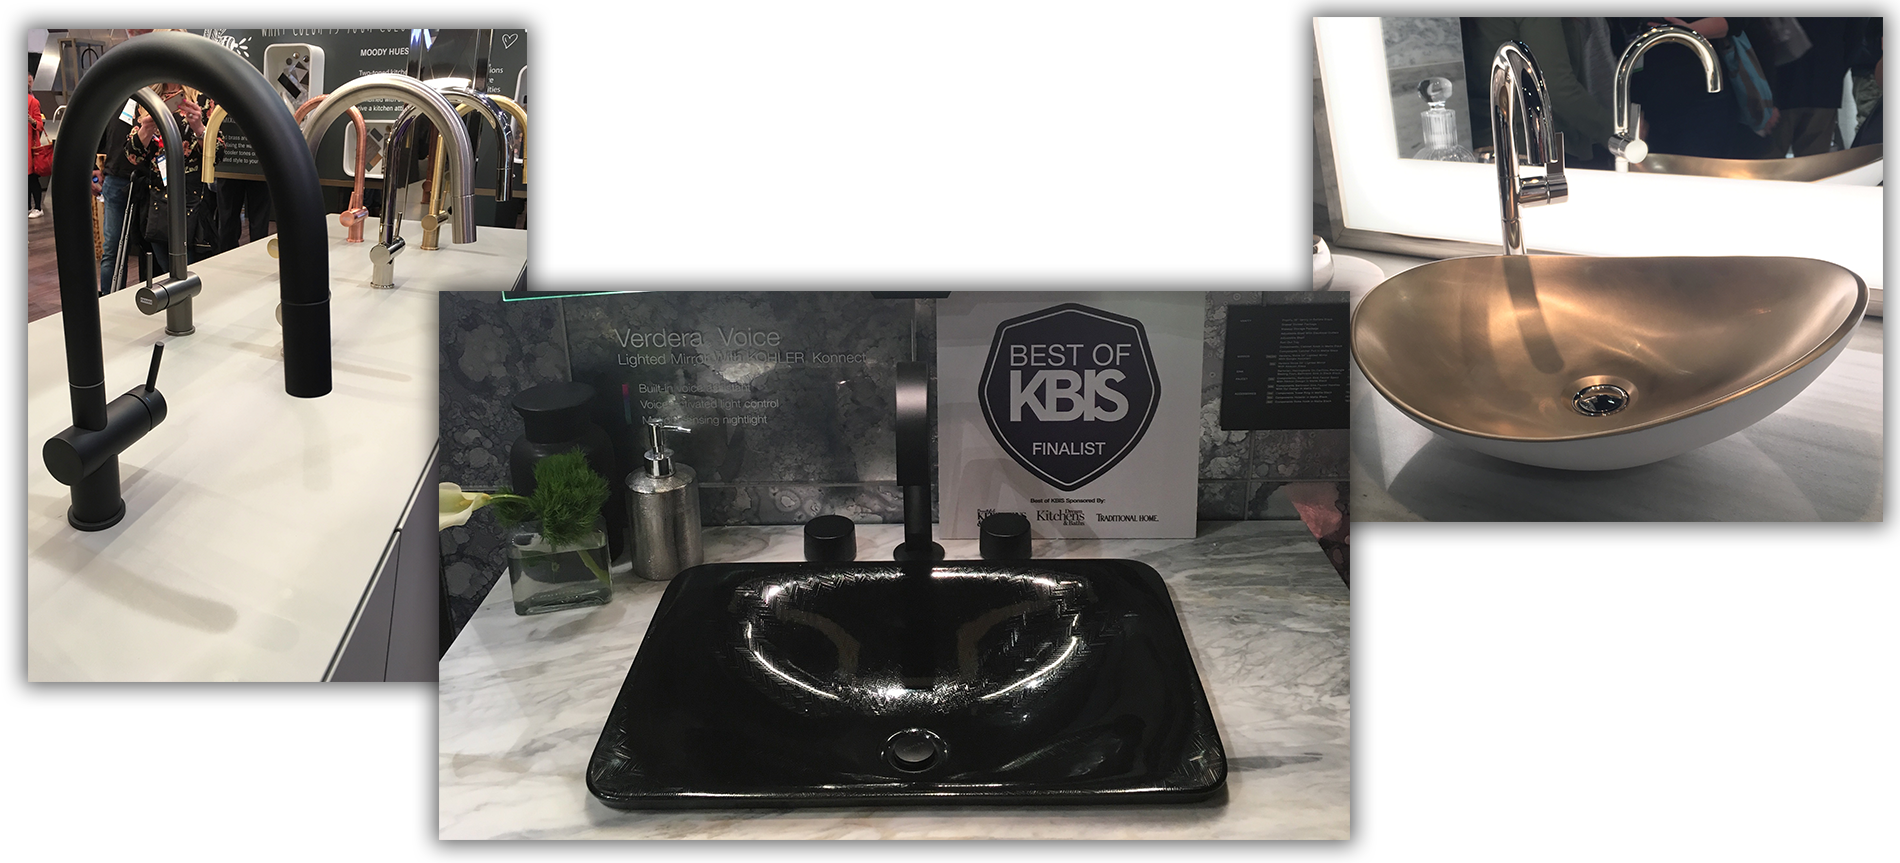 kbis-faucet-collage